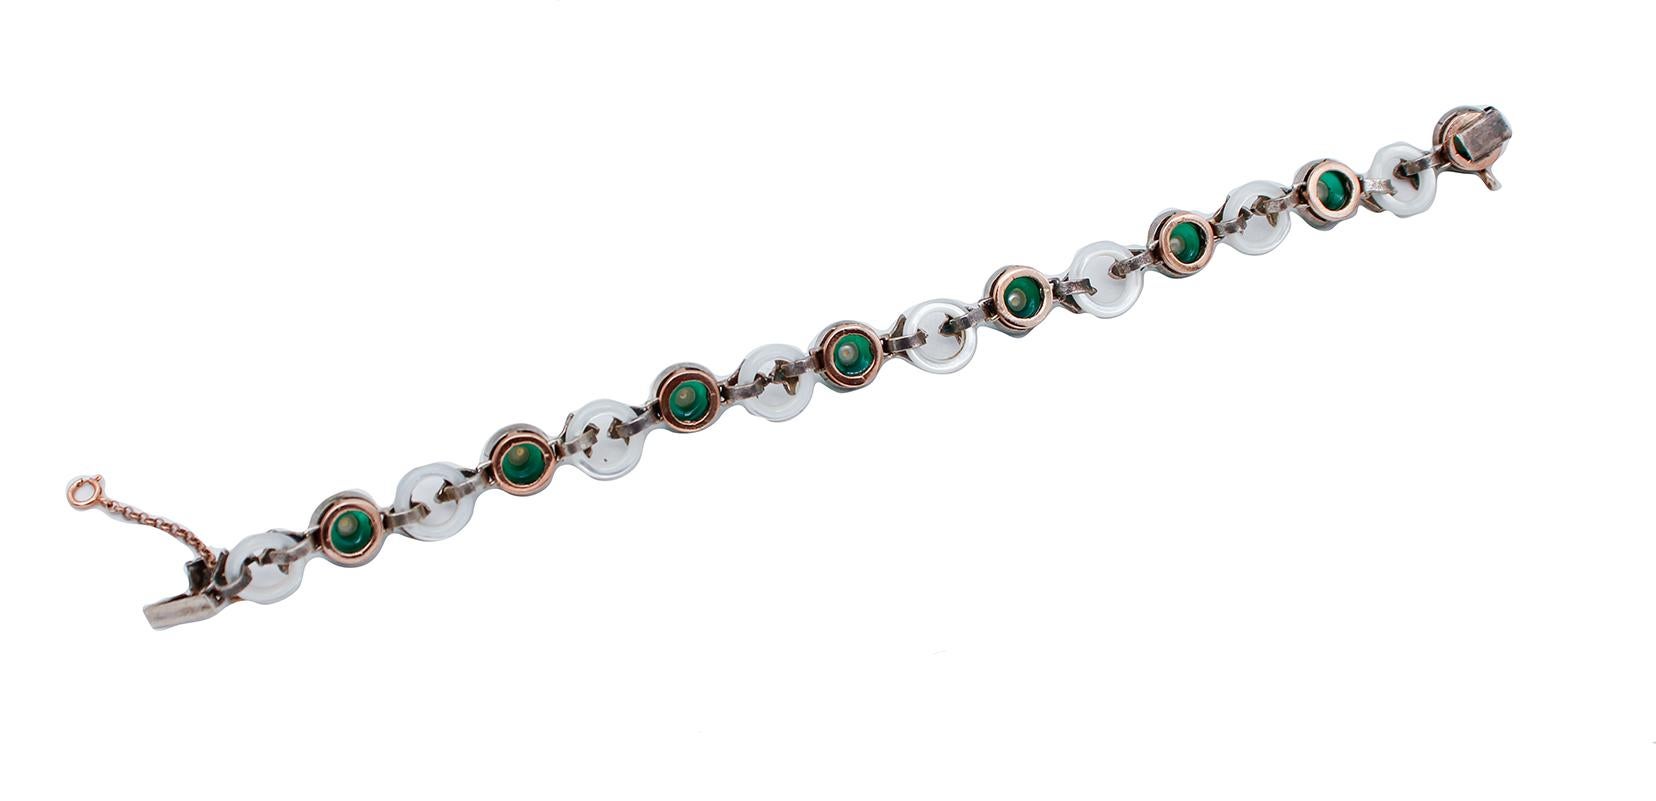 Retro Diamonds, Green Agate, Pearls, White Stones, 9kt Rose Gold and Silver Bracelet